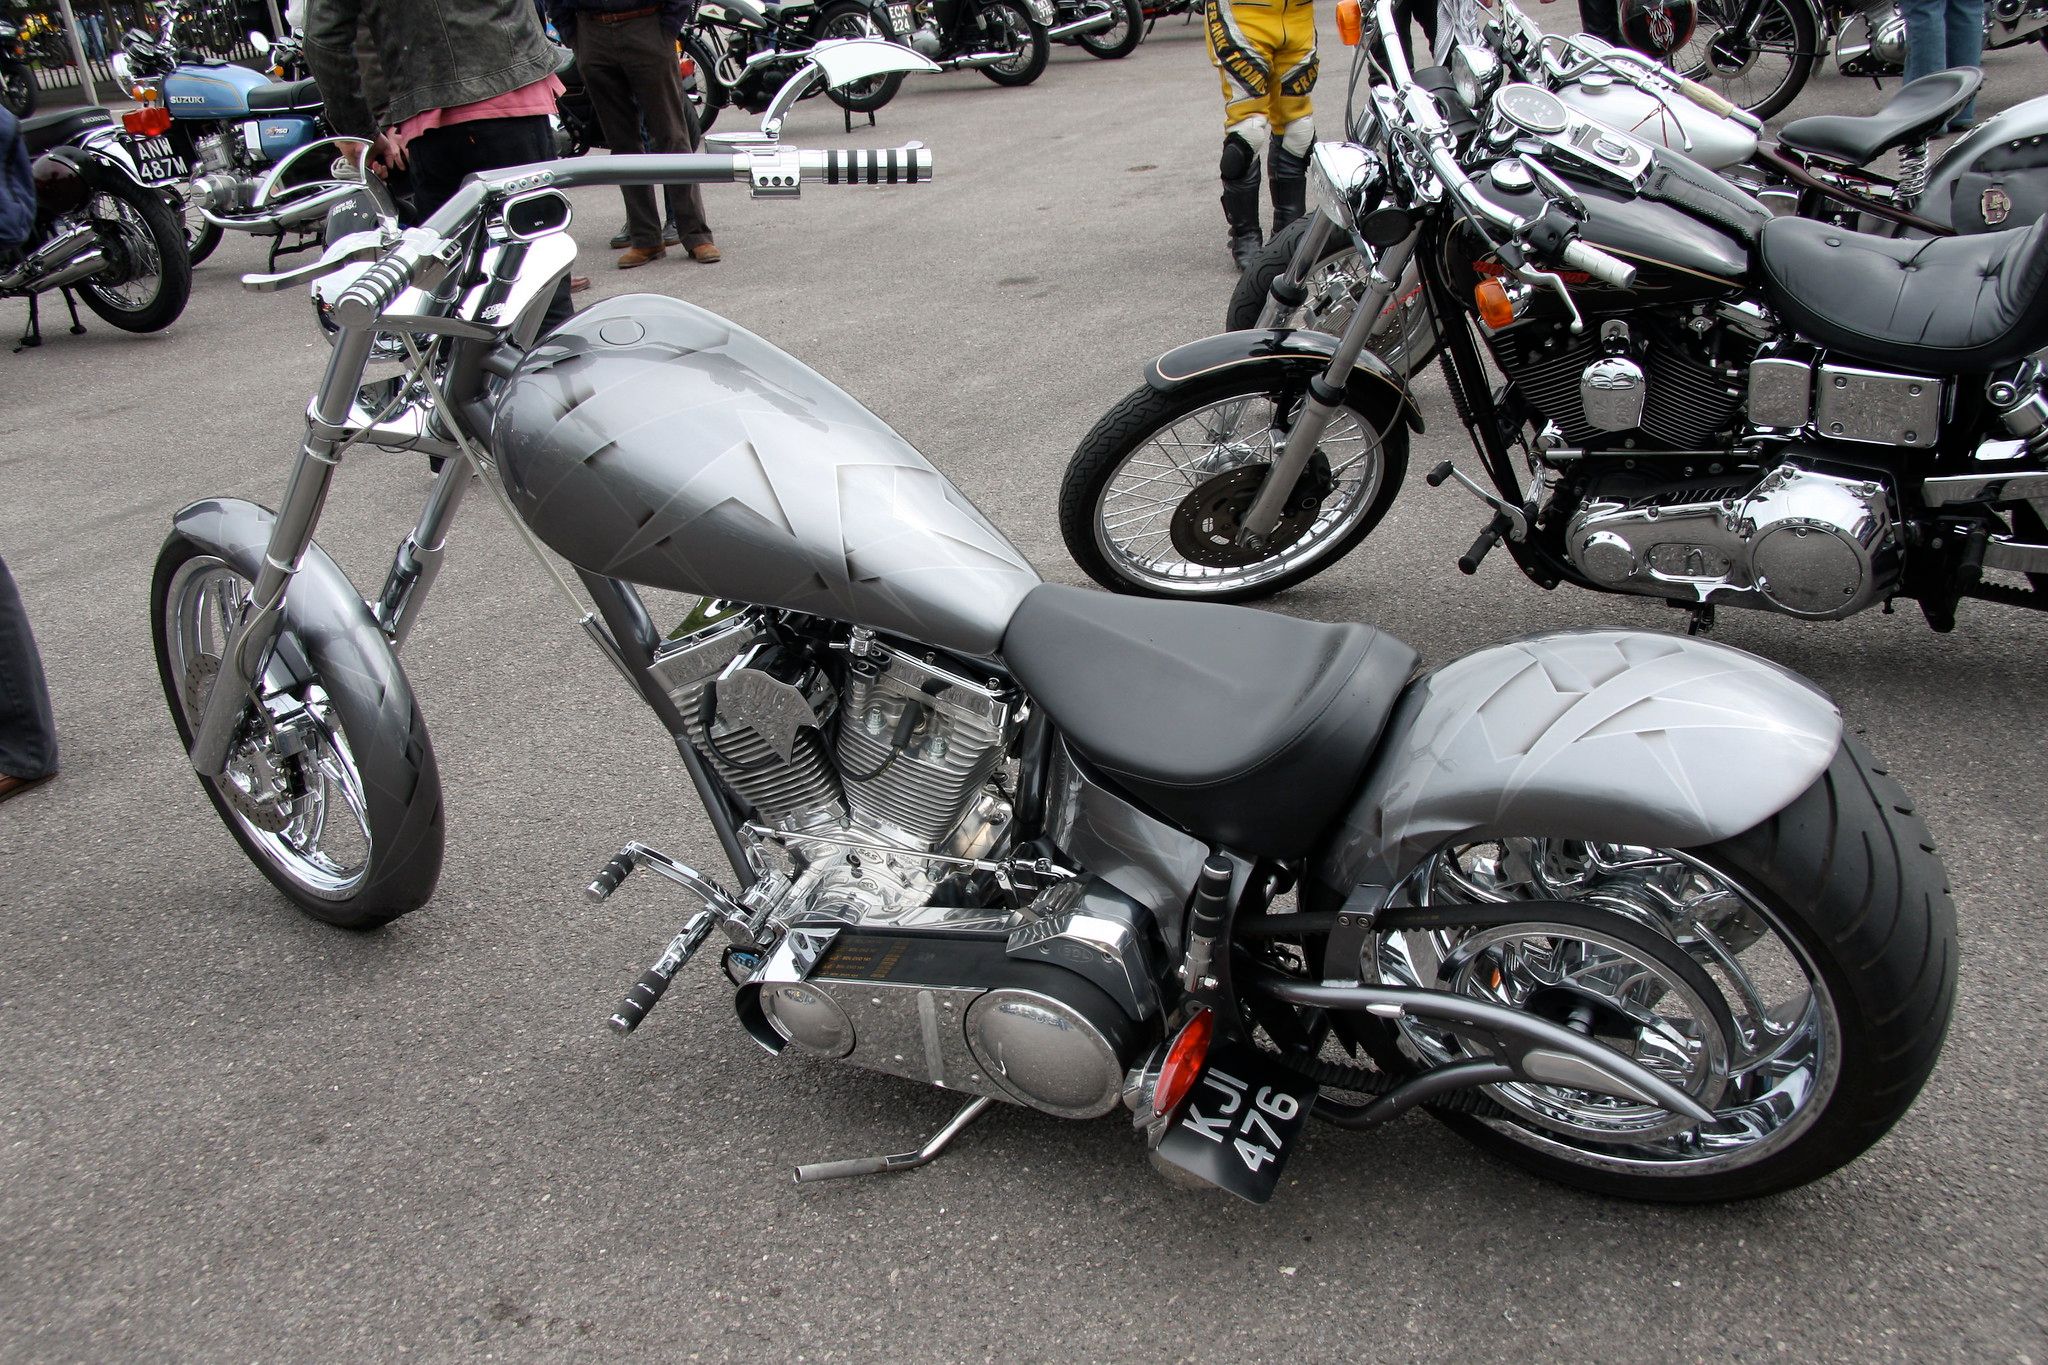 A motorcycle chopper